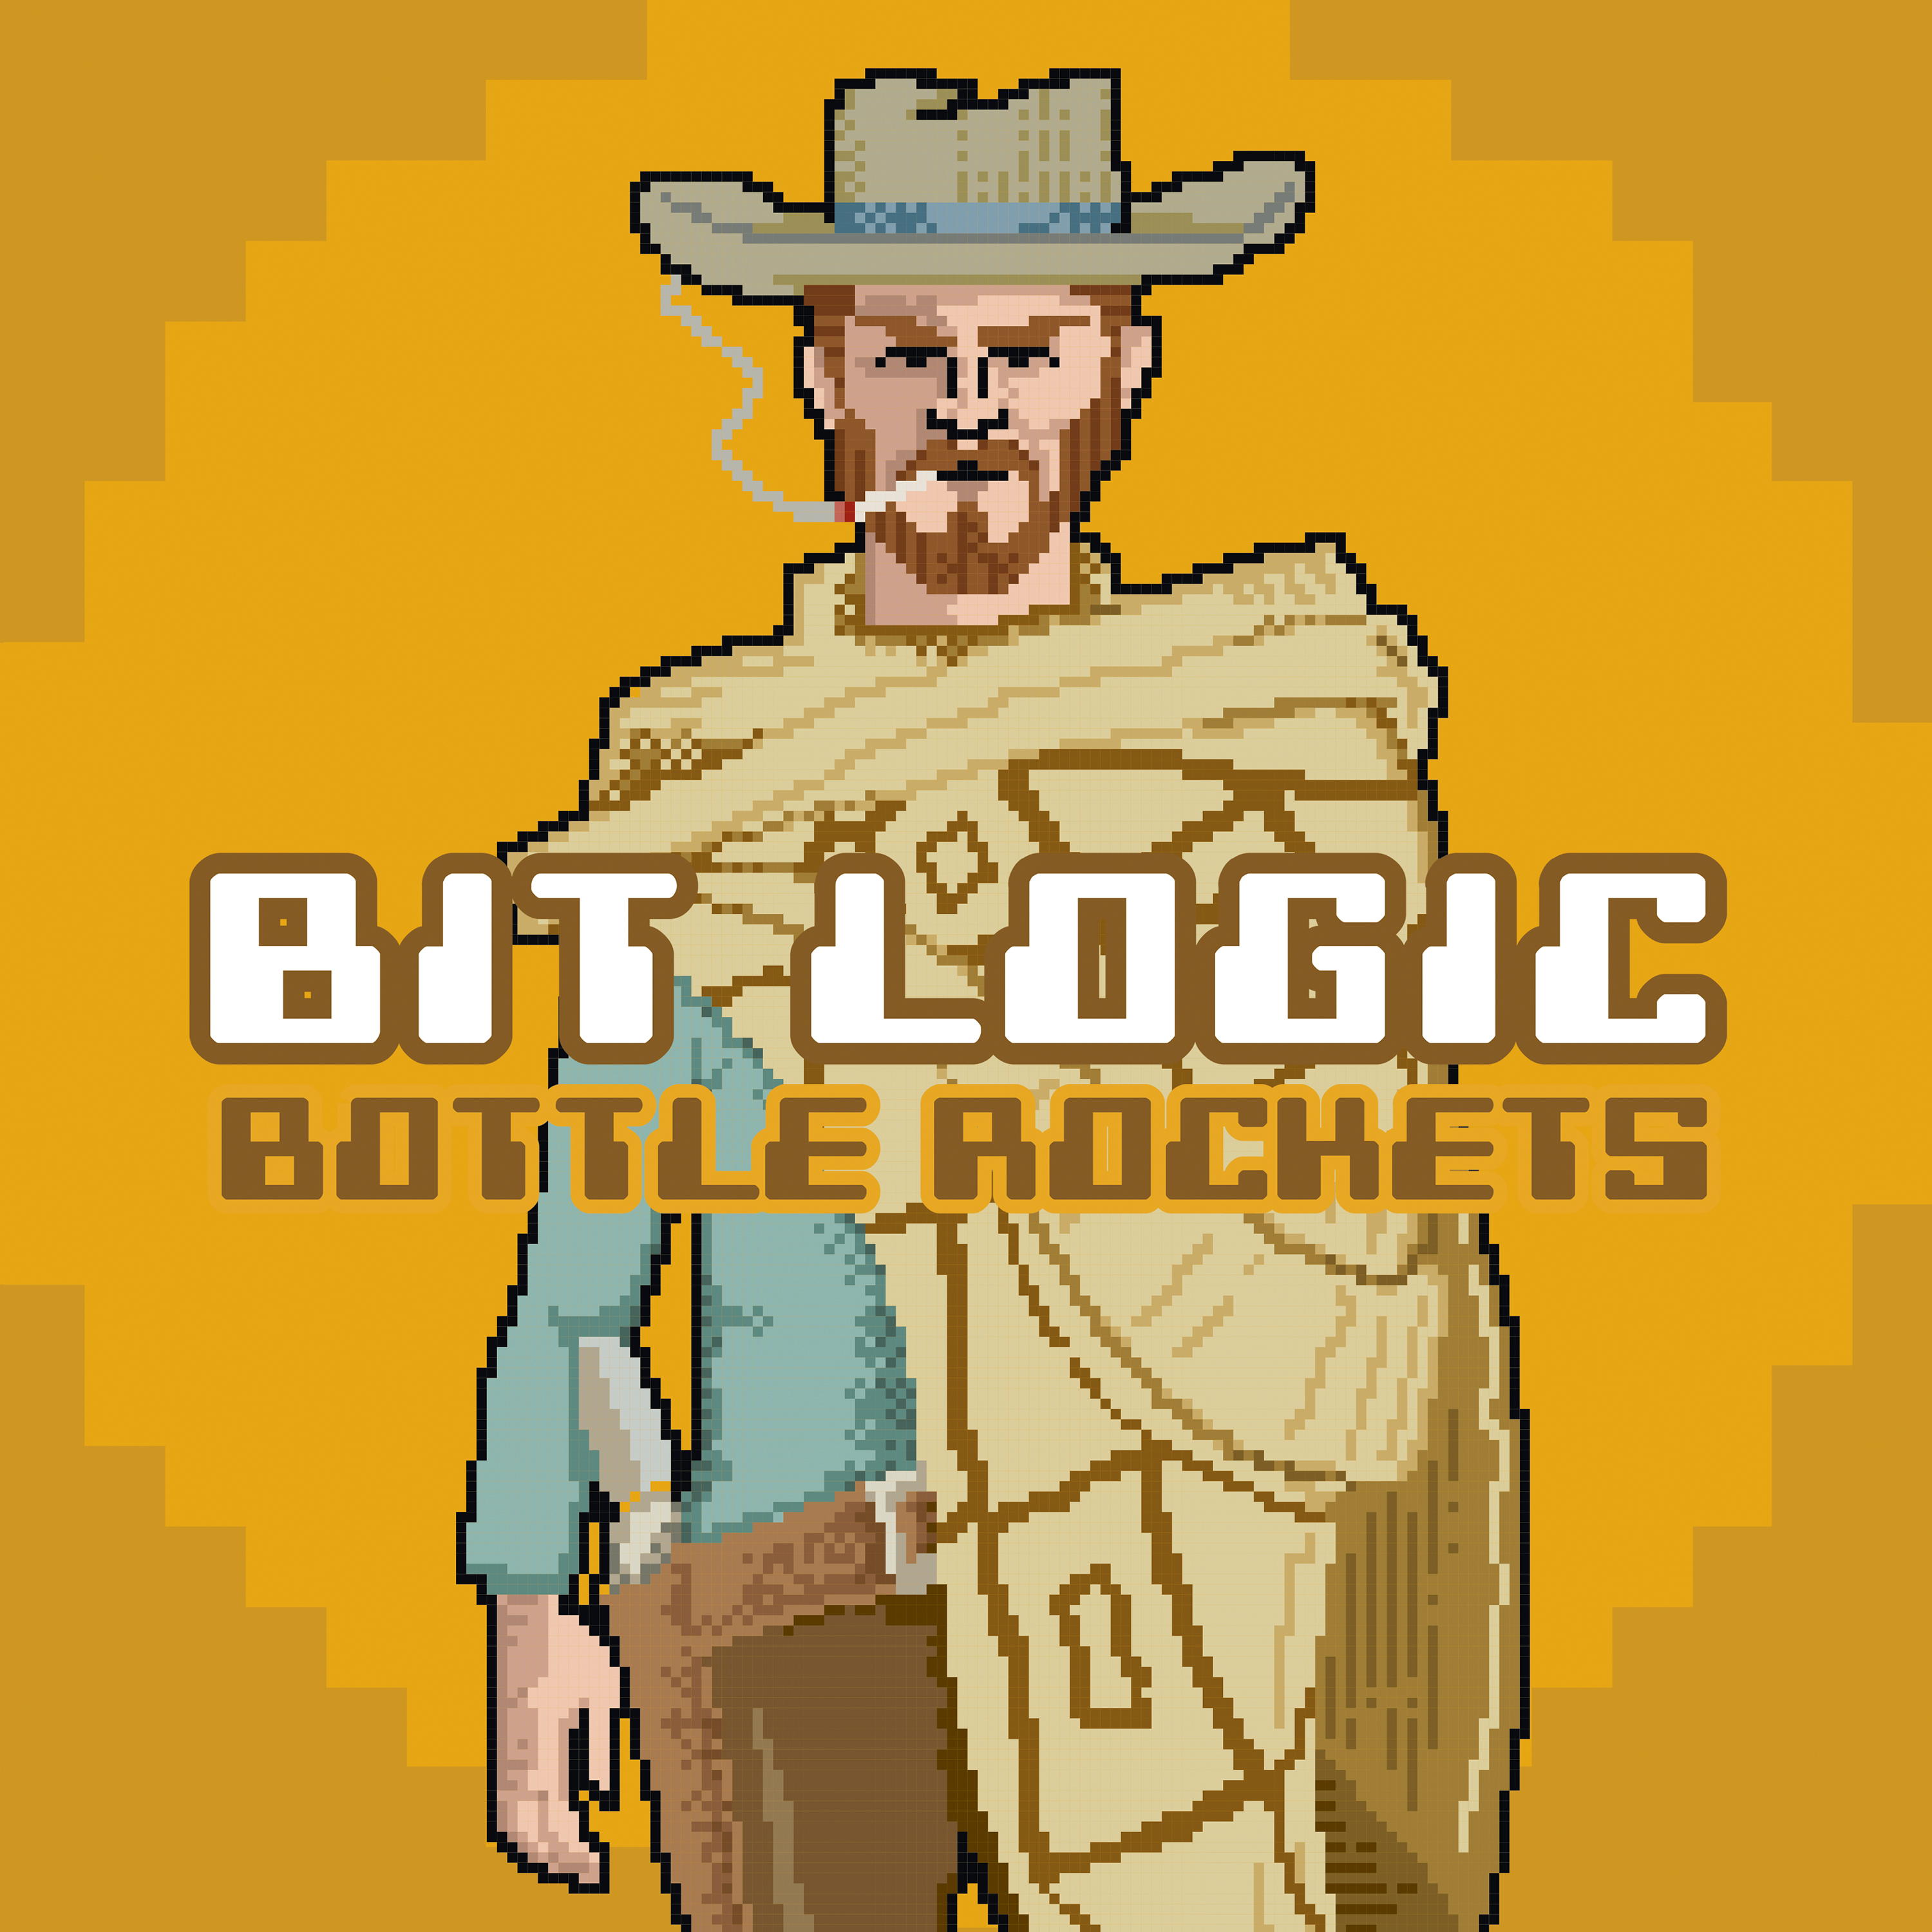 The Bottle Rockets' "Bit Logic" is available now